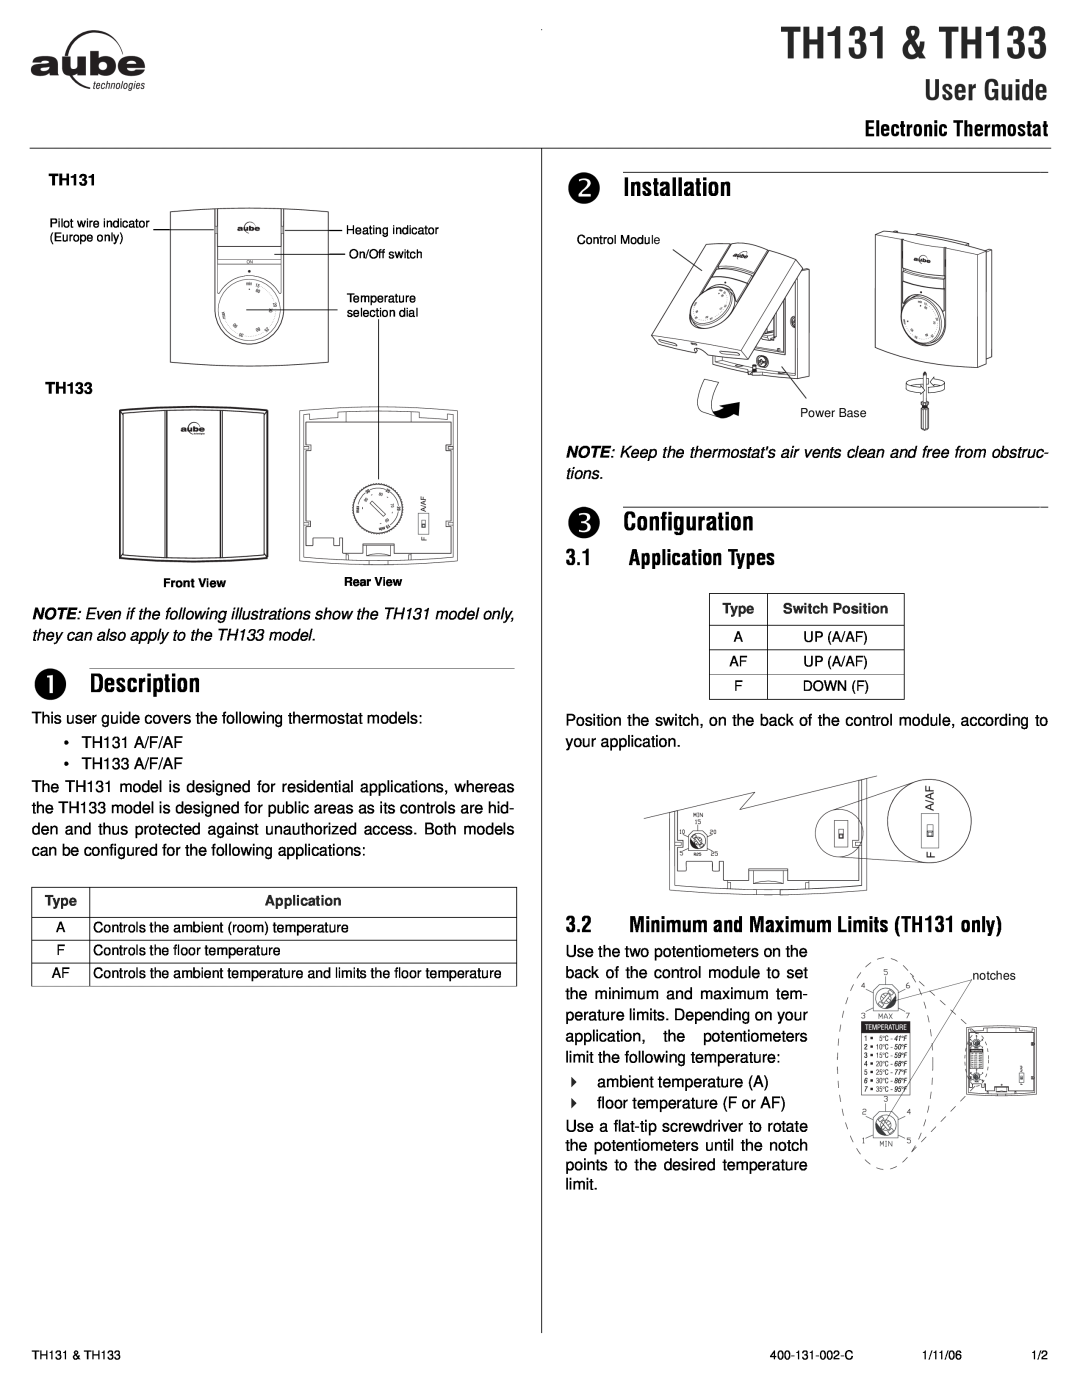 Aube Technologies TH133 manual o Installation, n Description, p Configuration, Electronic Thermostat, Application Types 